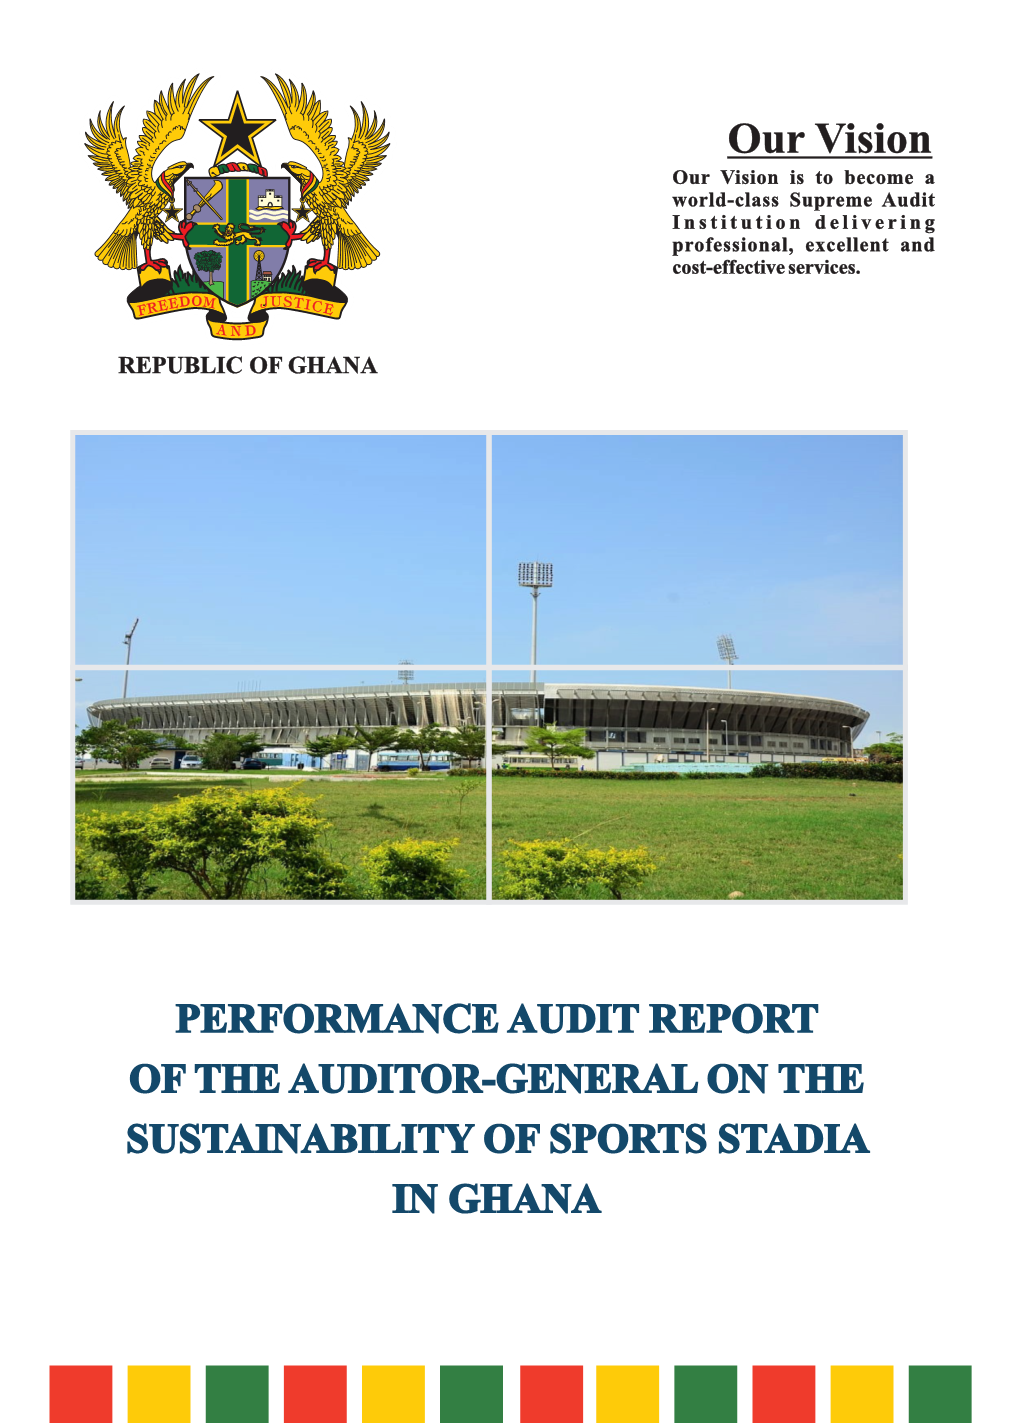 Performance Audit Report of the Auditor-General on Sustainability of Sports Stadia in Ghana